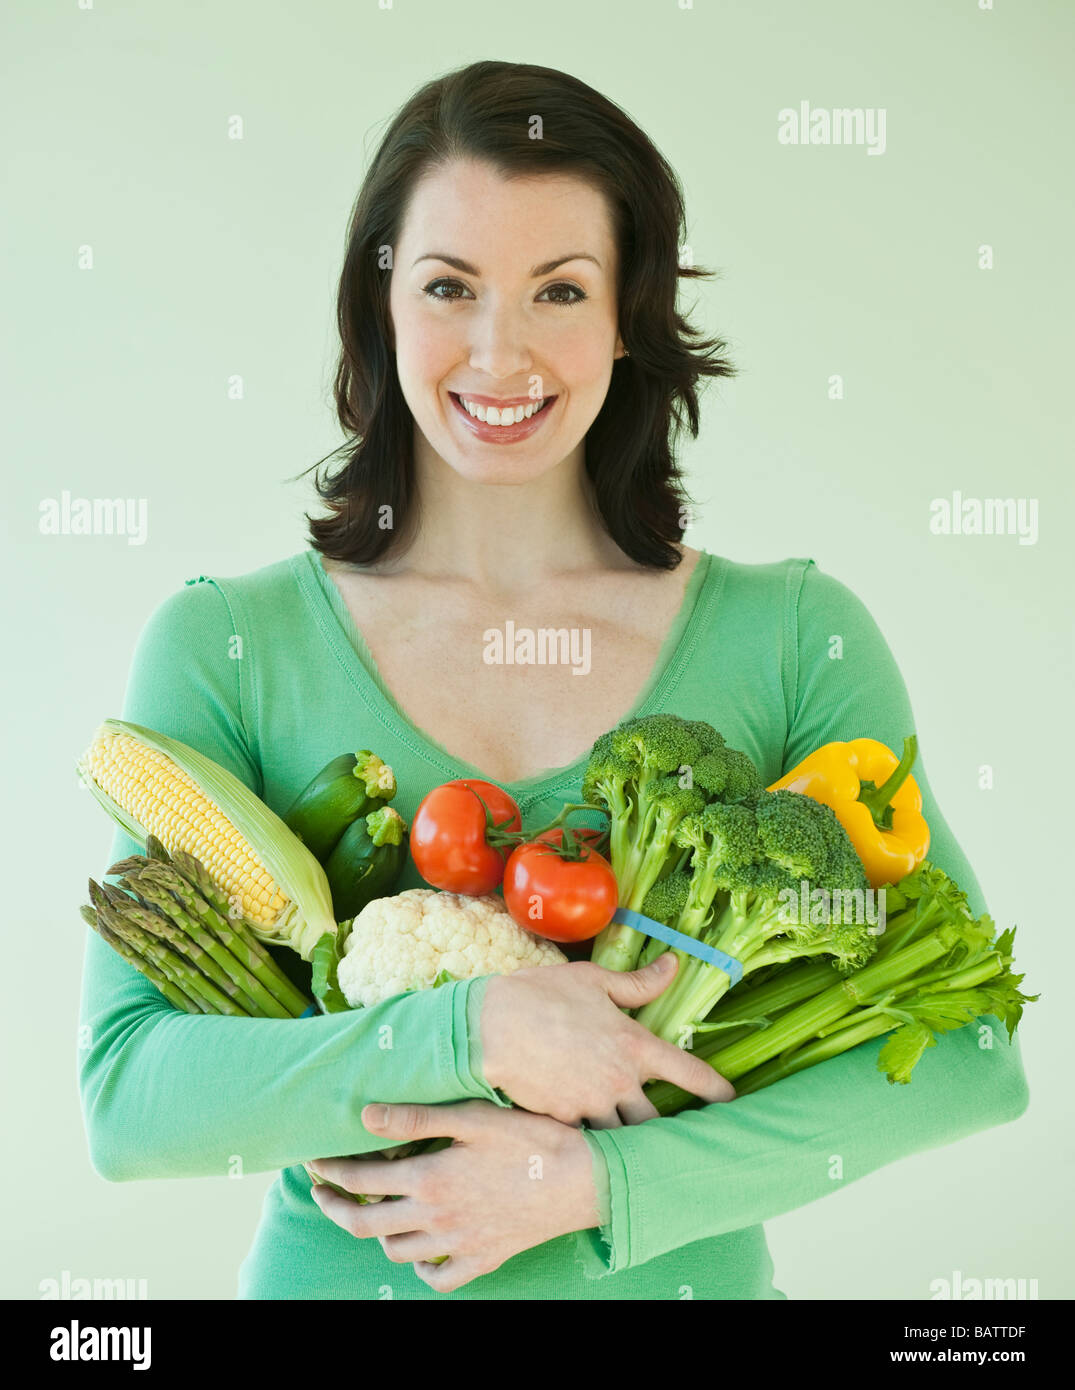 Woman holding various vegetables Stock Photo